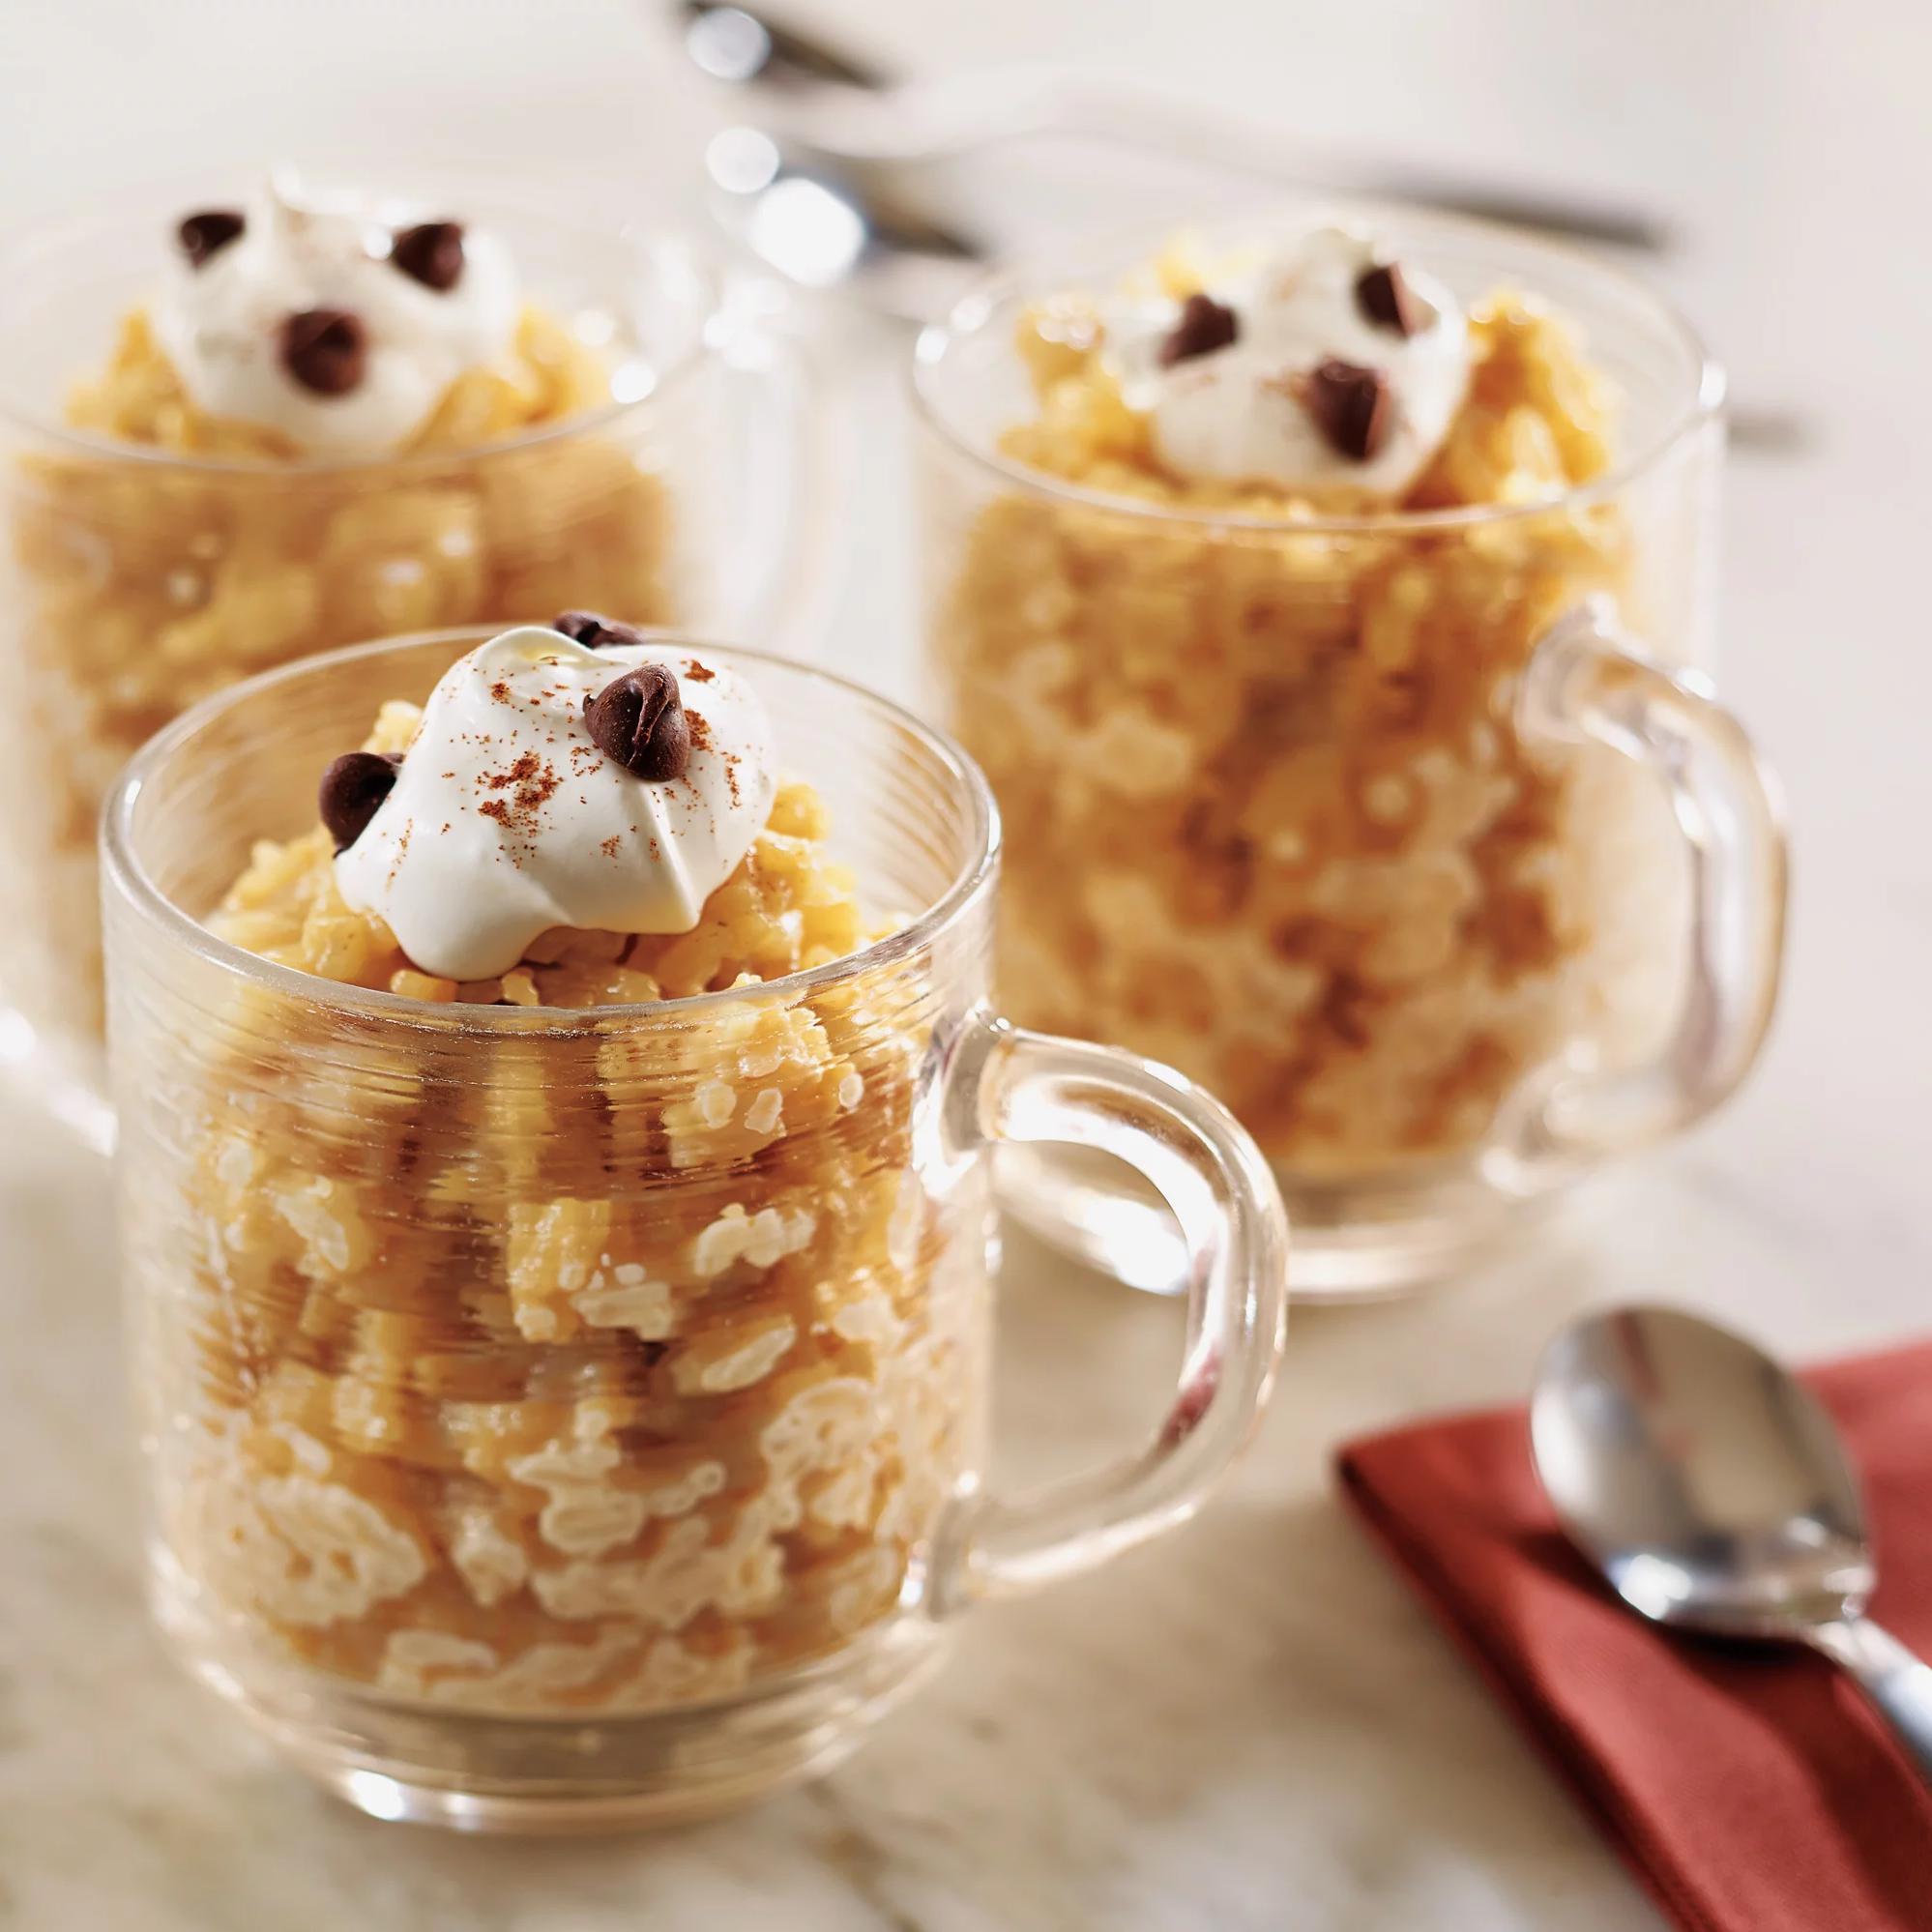  A deliciously creamy twist on rice pudding